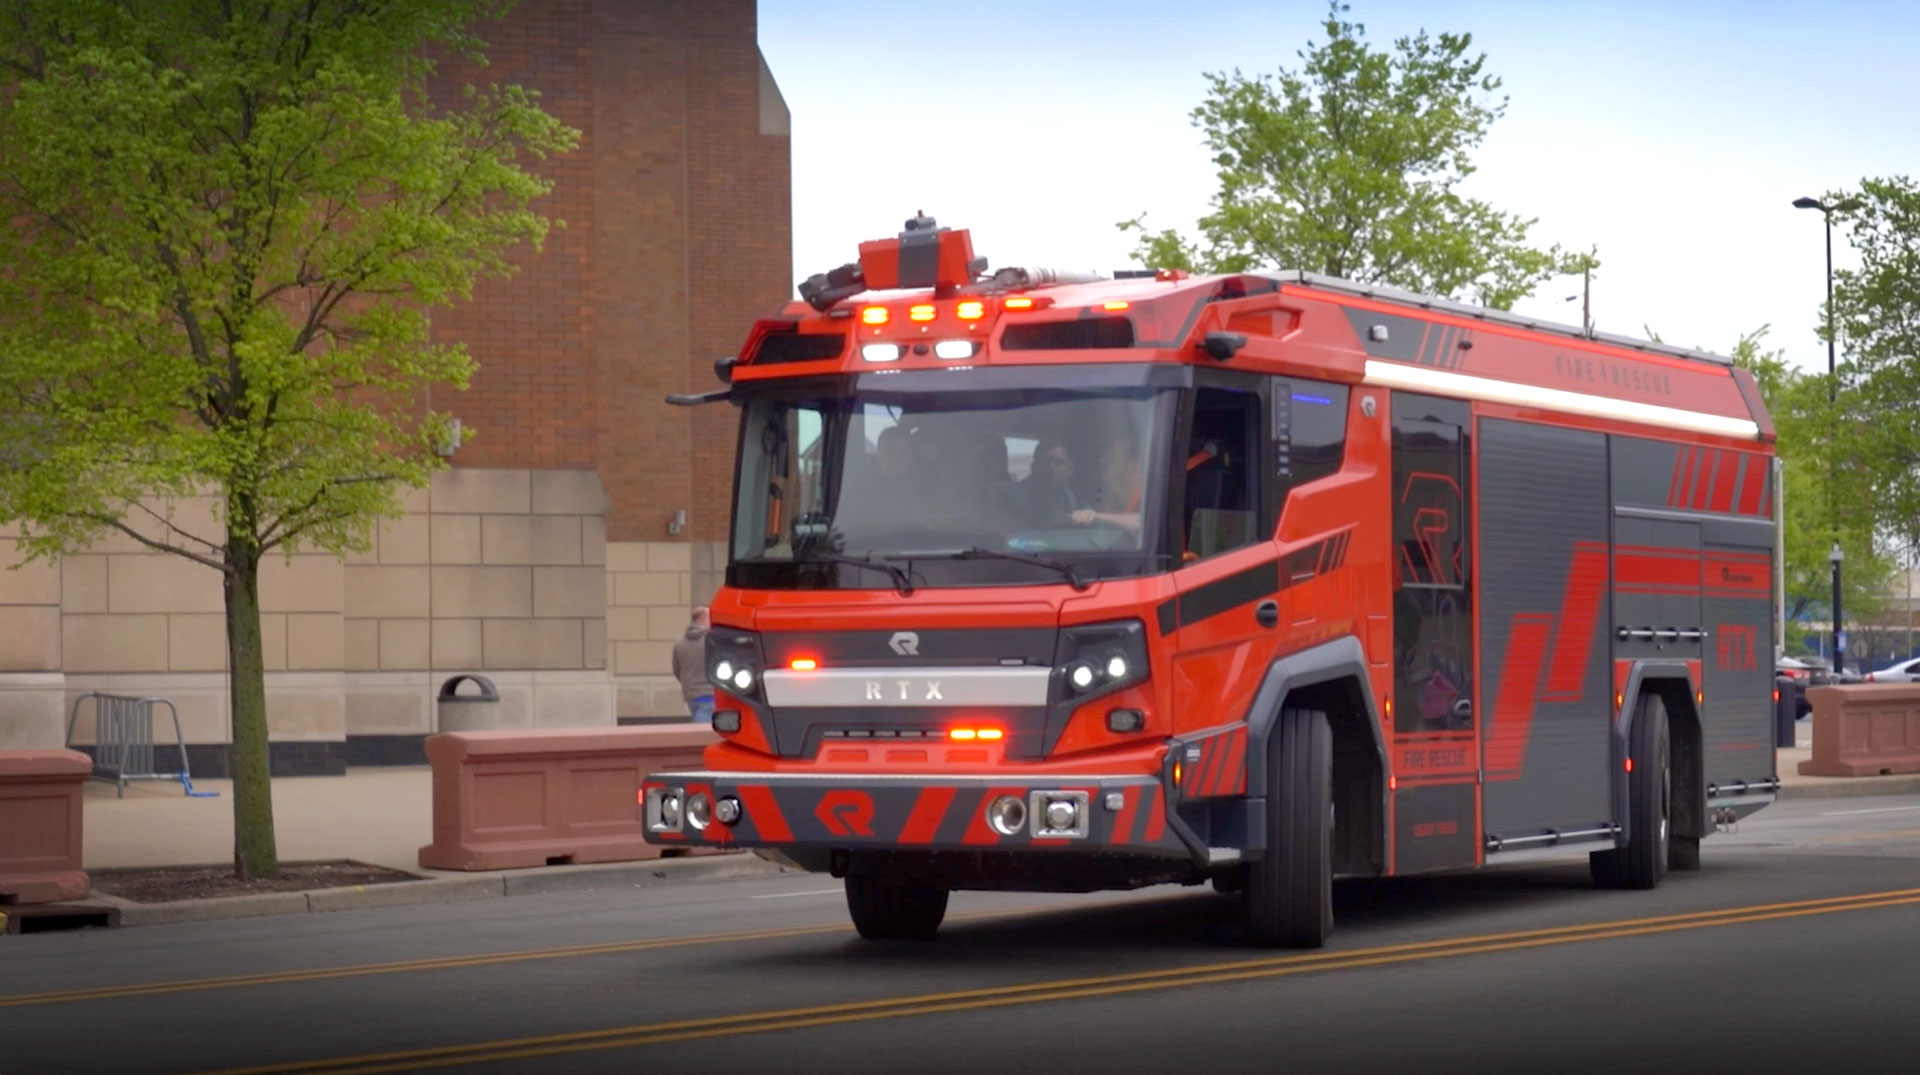 Featured image for “Test drive the Rosenbauer RTX Electric Fire Truck”